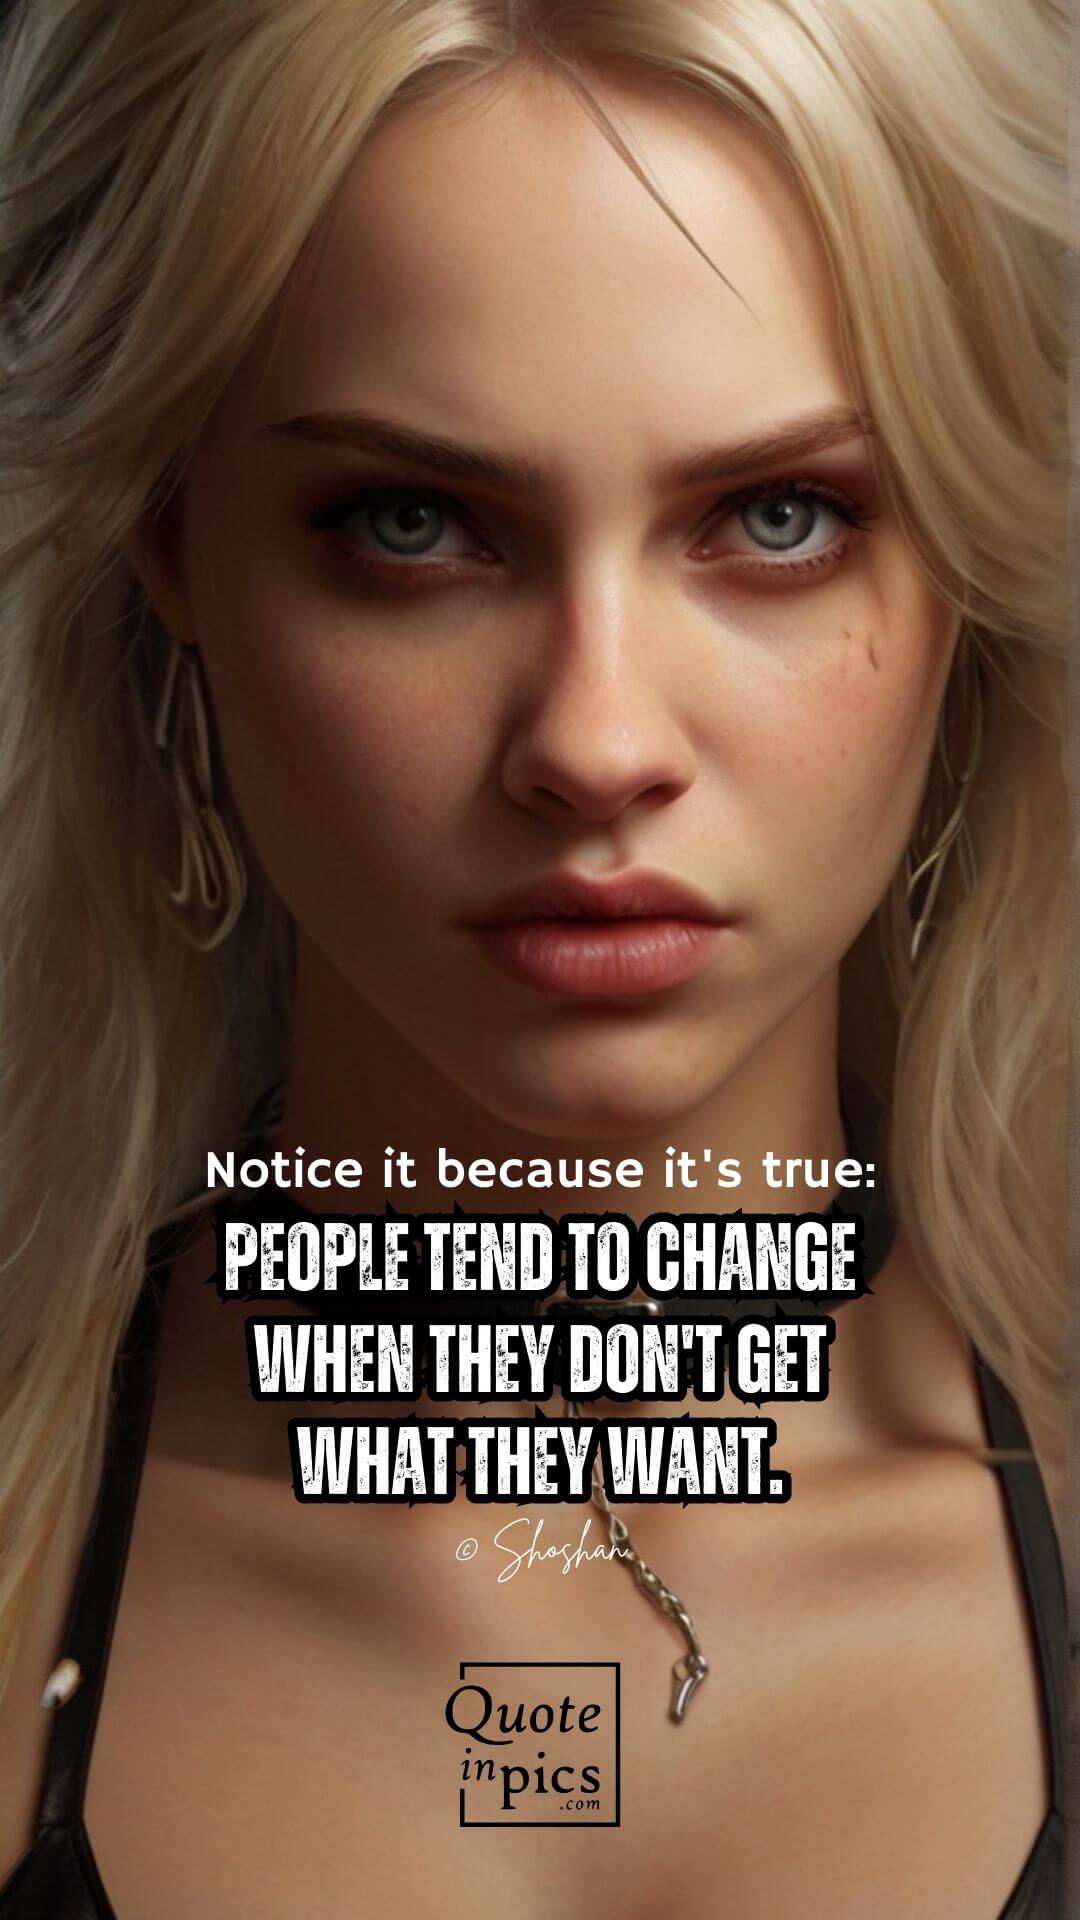 People tend to change when they don't get what they want.